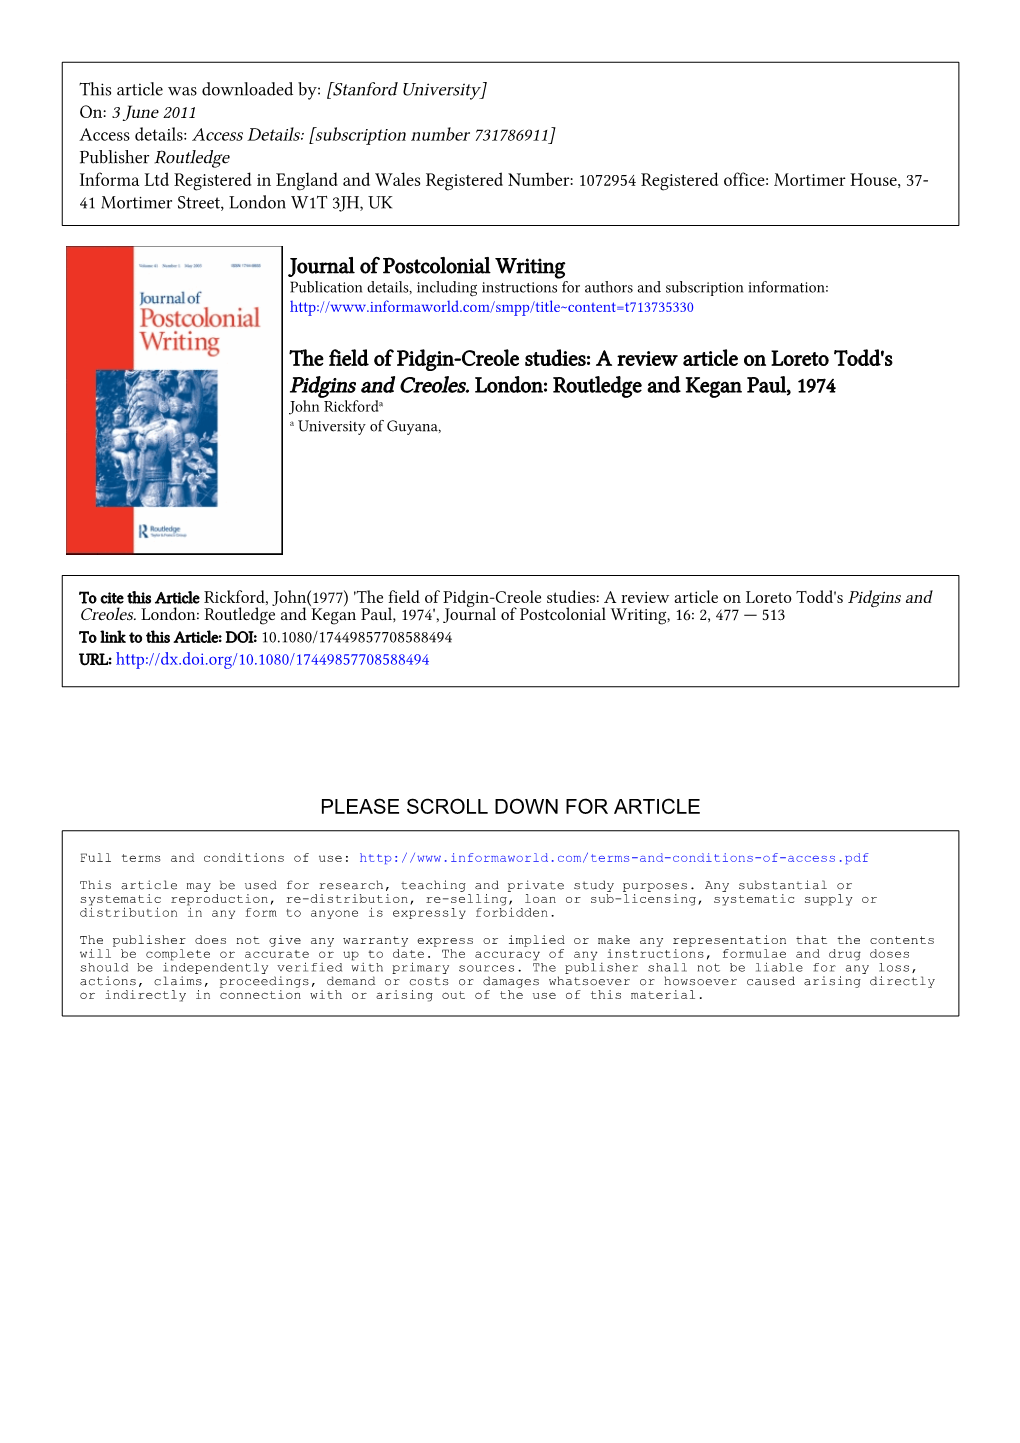 Journal of Postcolonial Writing the Field of Pidgin